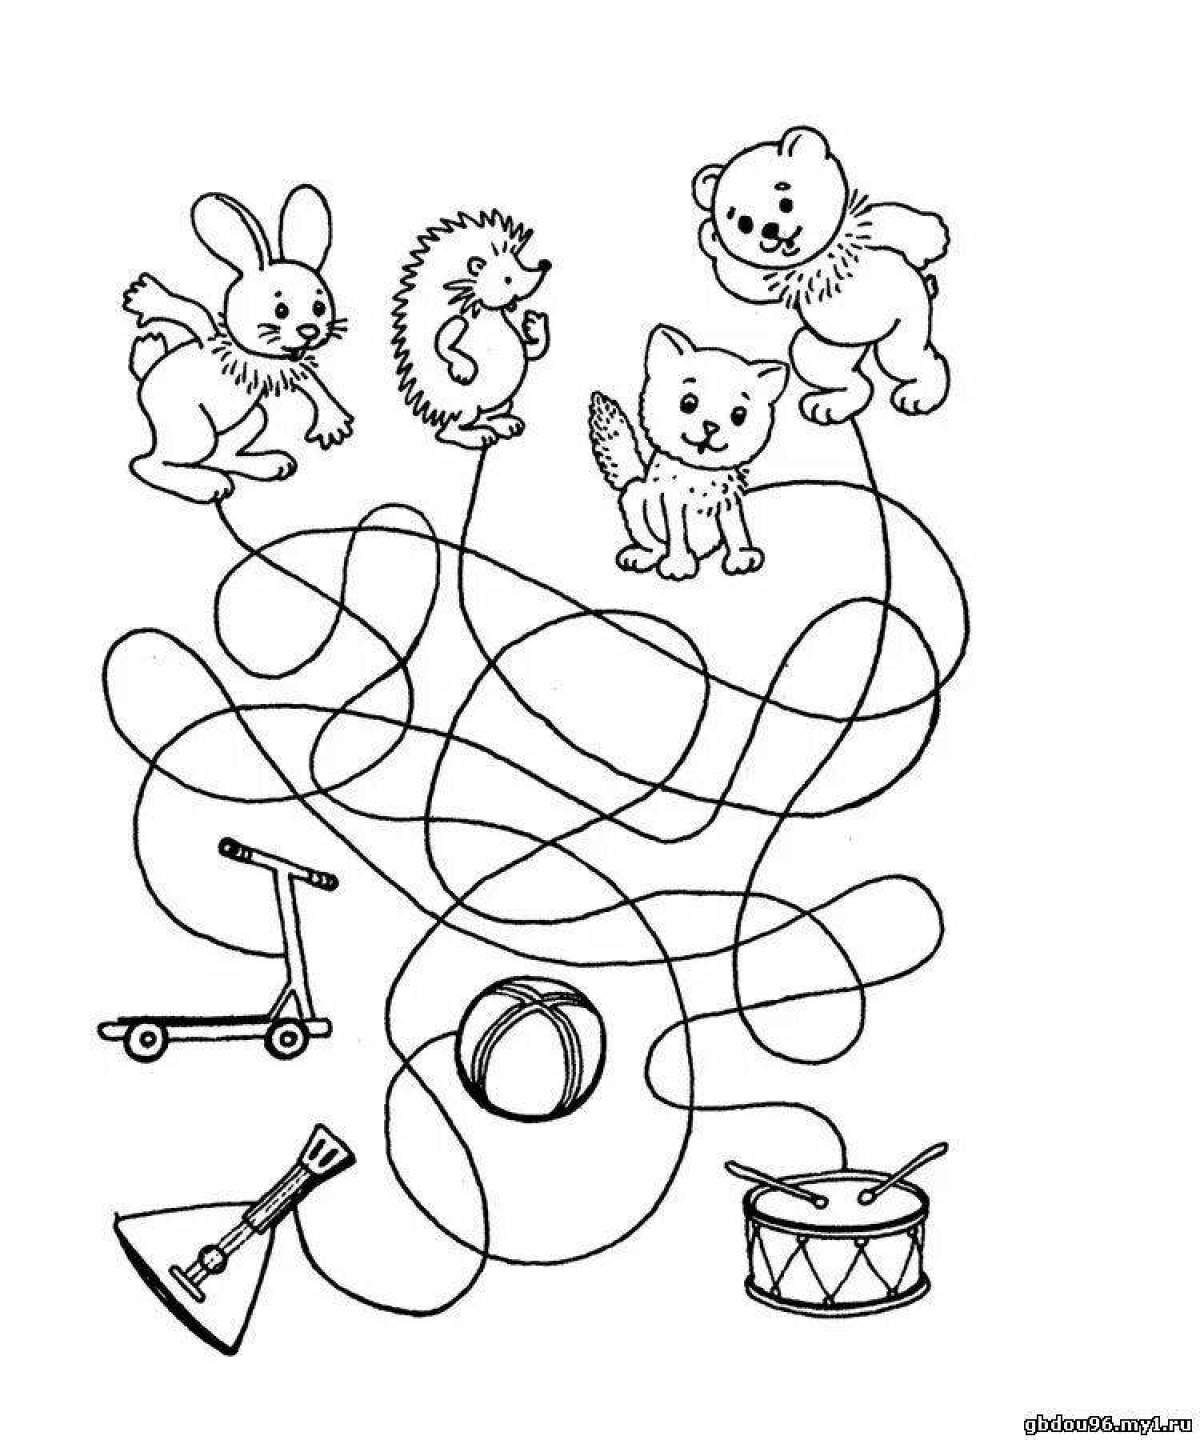 Fancy coloring games for 4 year olds